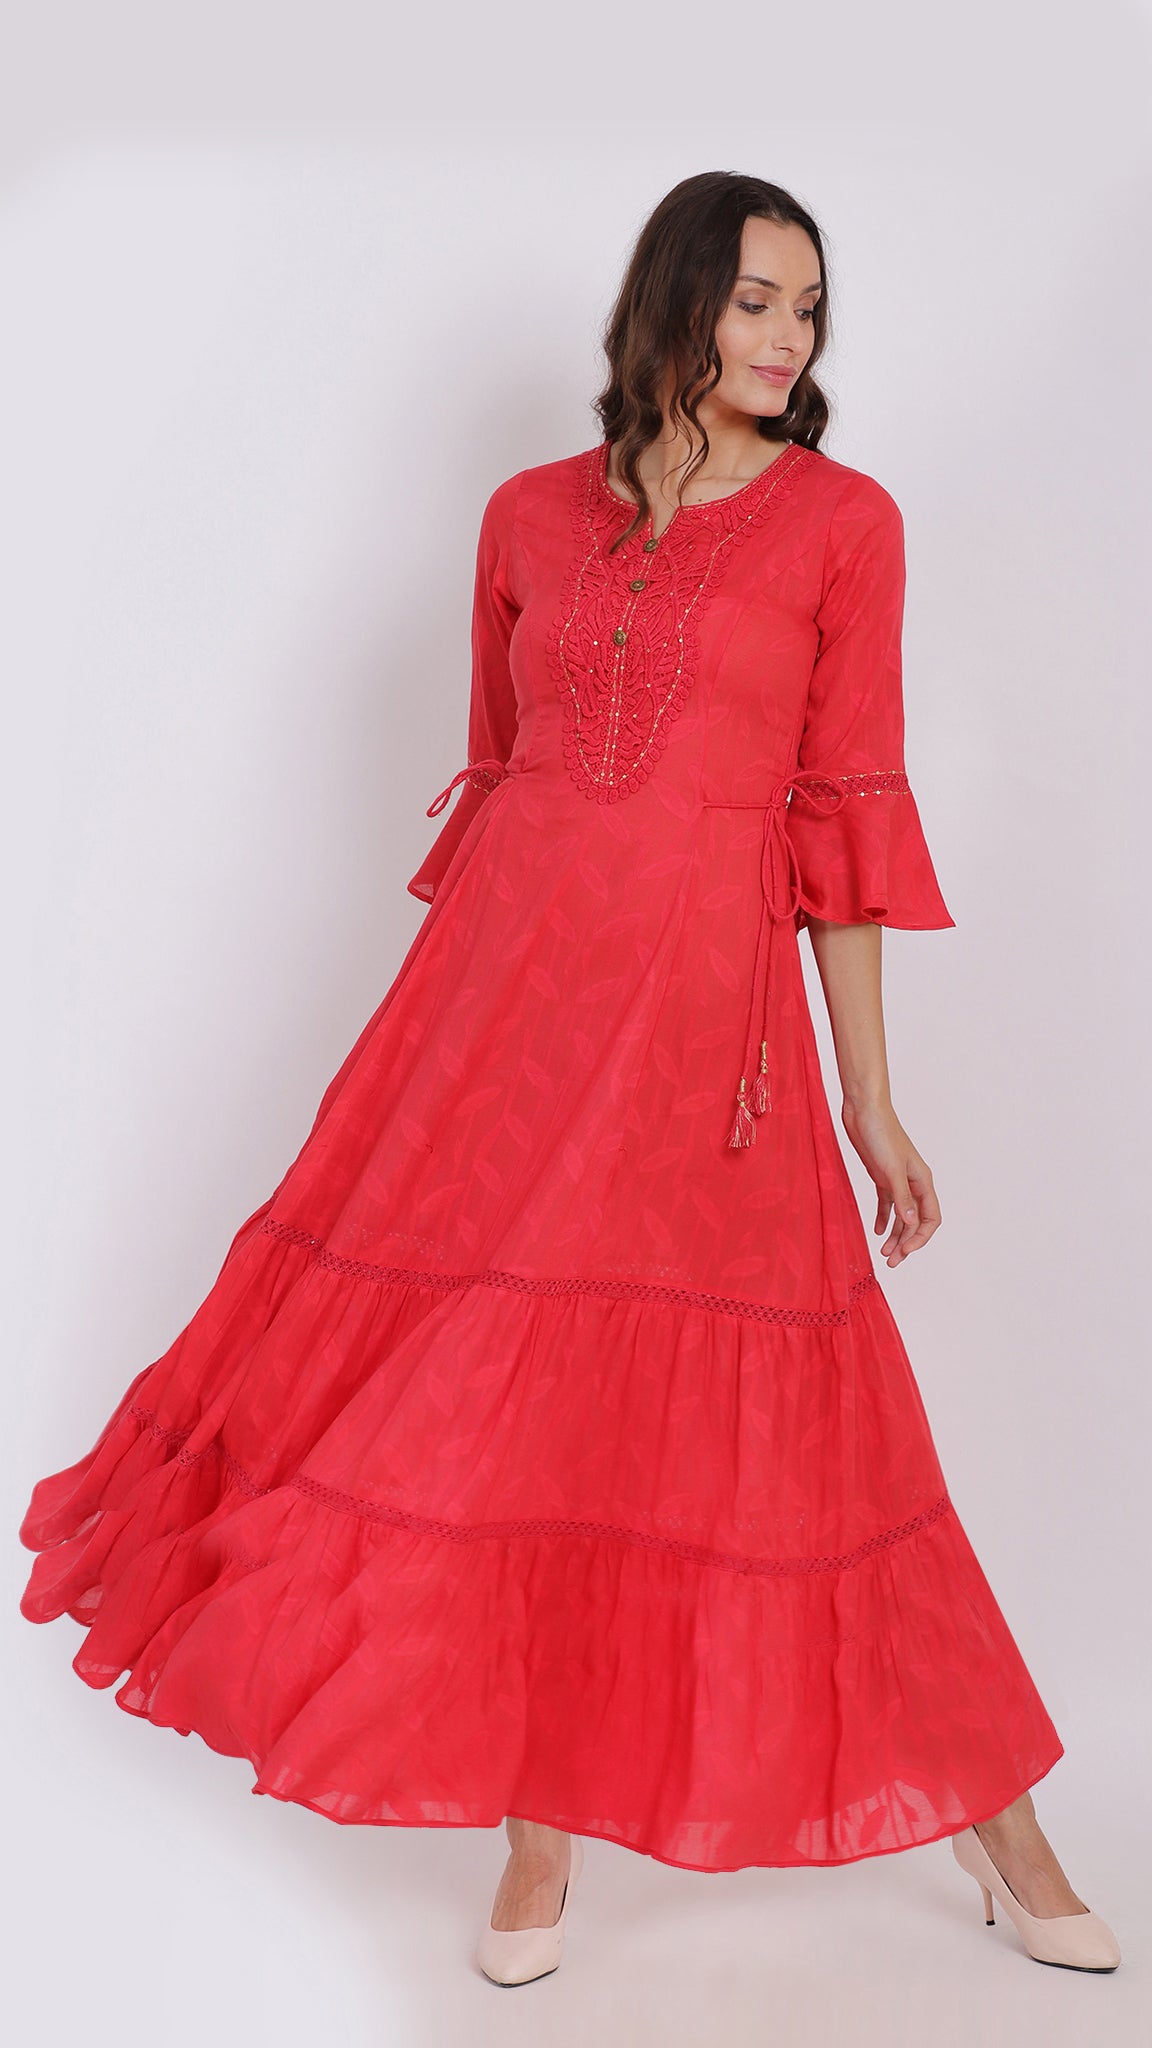 Embroidered neck coral tiered dress